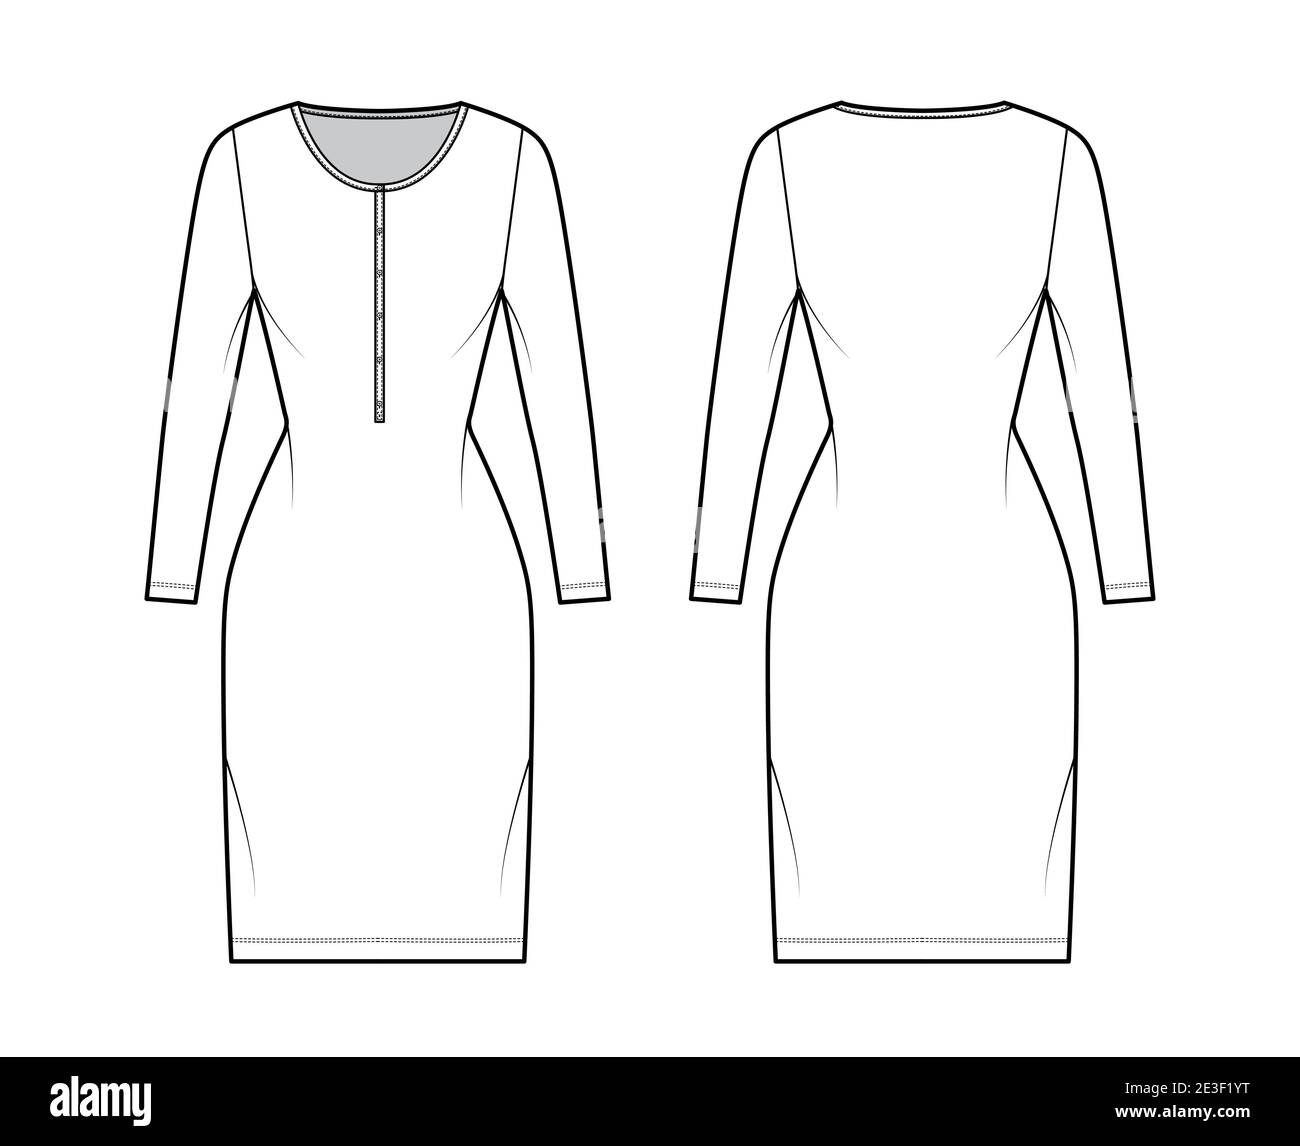 Shirt dress technical fashion illustration with henley neck, long sleeves, knee length, fitted body, Pencil fullness. Flat apparel template front, back, white color. Women, men, unisex CAD mockup Stock Vector